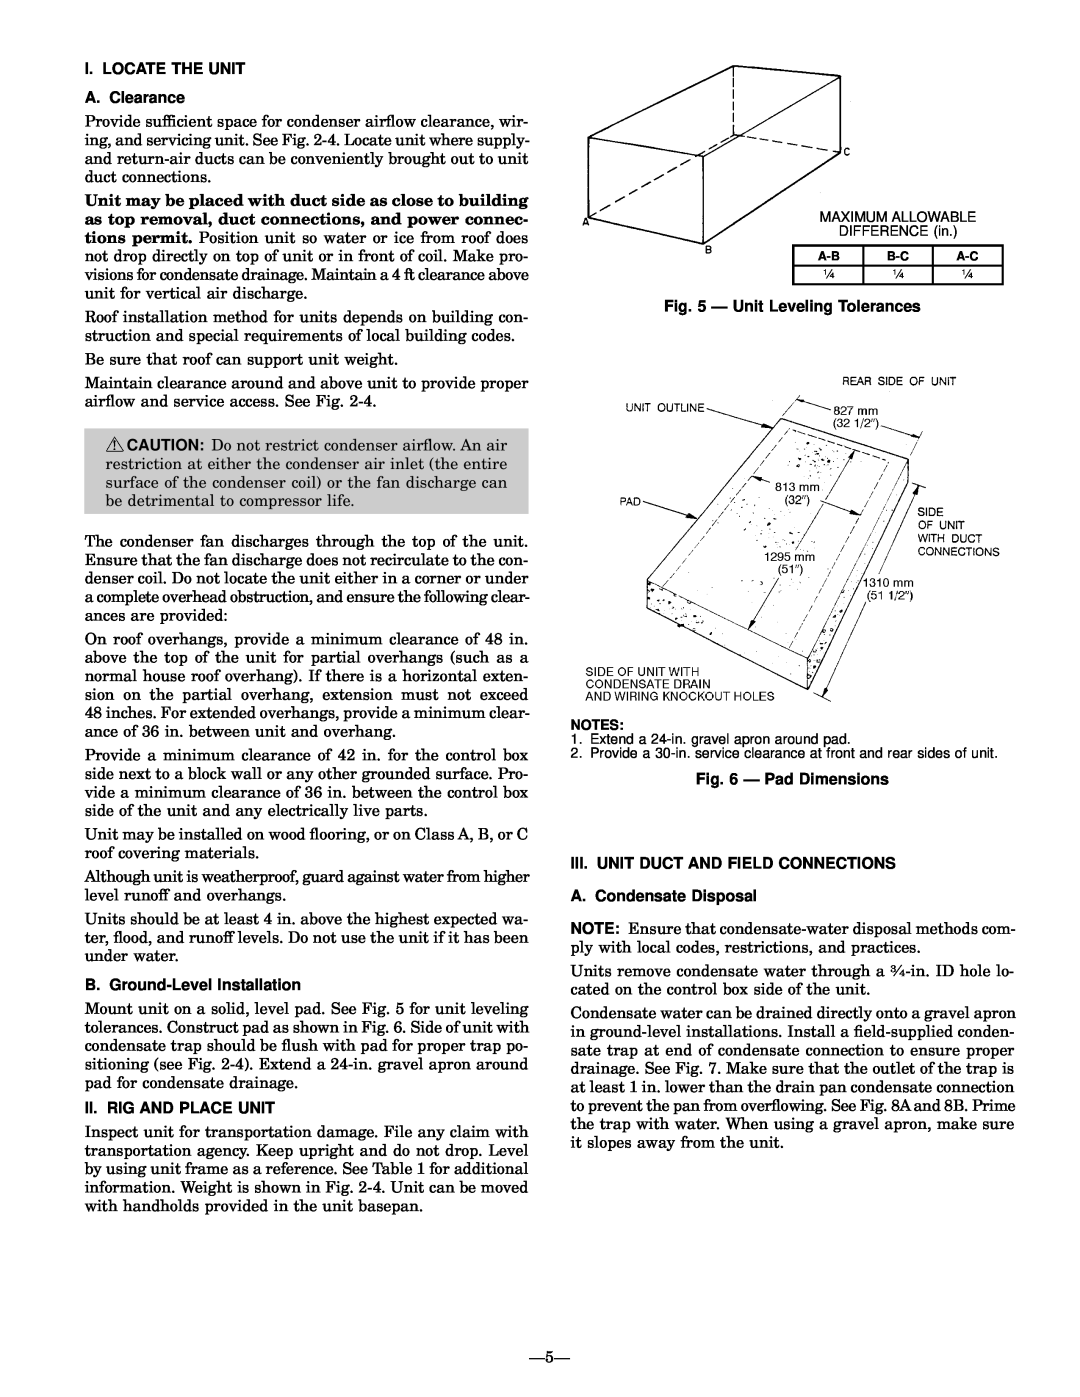 Bryant 764A I. LOCATE THE UNIT A. Clearance, B. Ground-LevelInstallation, Ii. Rig And Place Unit, Ð Pad Dimensions 